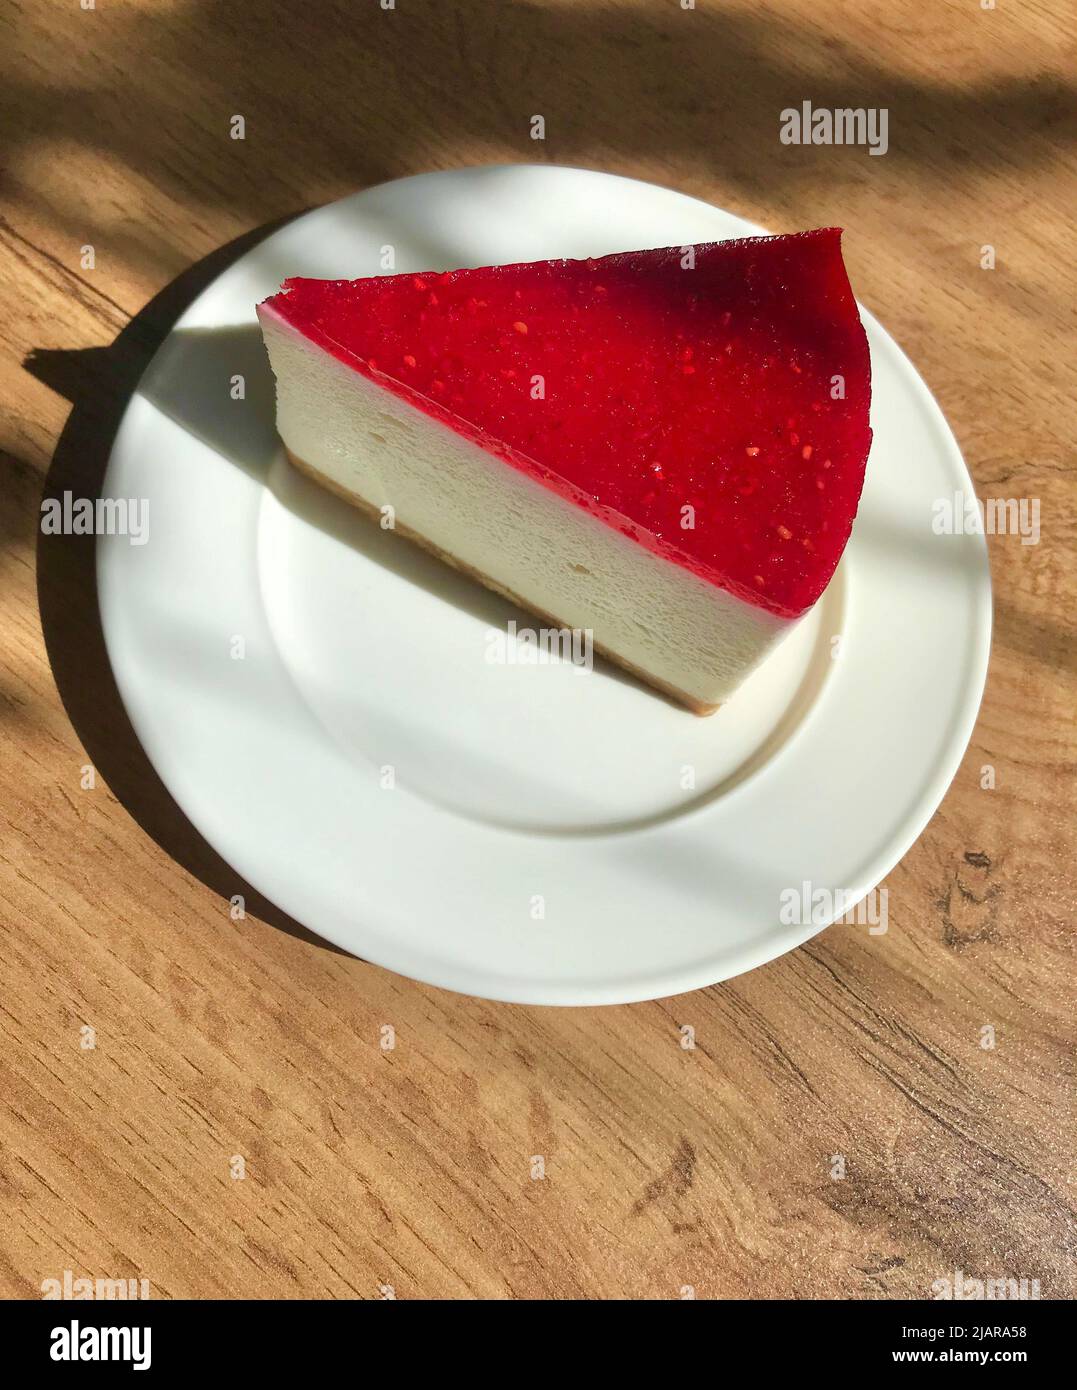 Raspberry cheesecake on a white plate. Wooden table with shadows. Breakfast in a cafe. Stock Photo